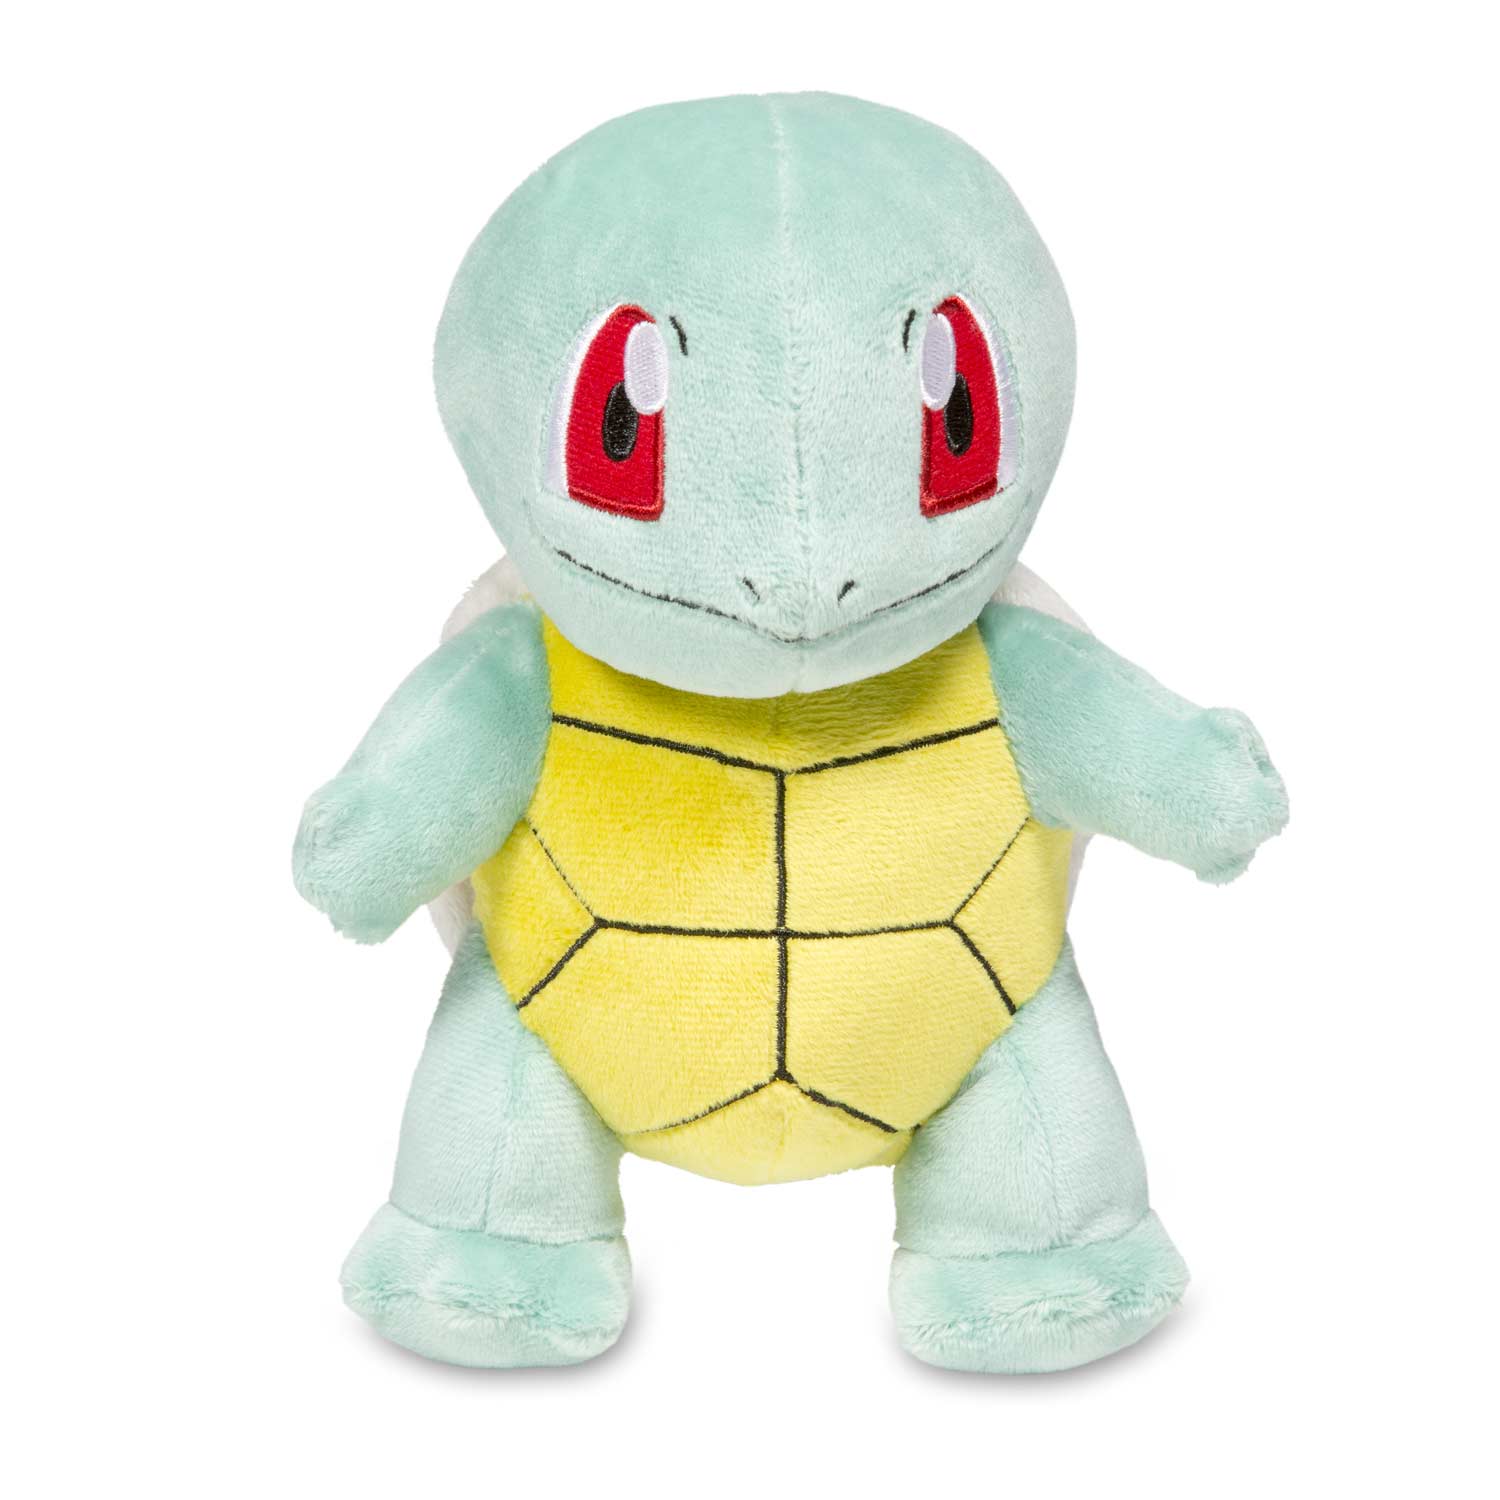 Officially Licensed 2020 NWT Toy Factory Squirtle Pokemon Plush 7"-8" 